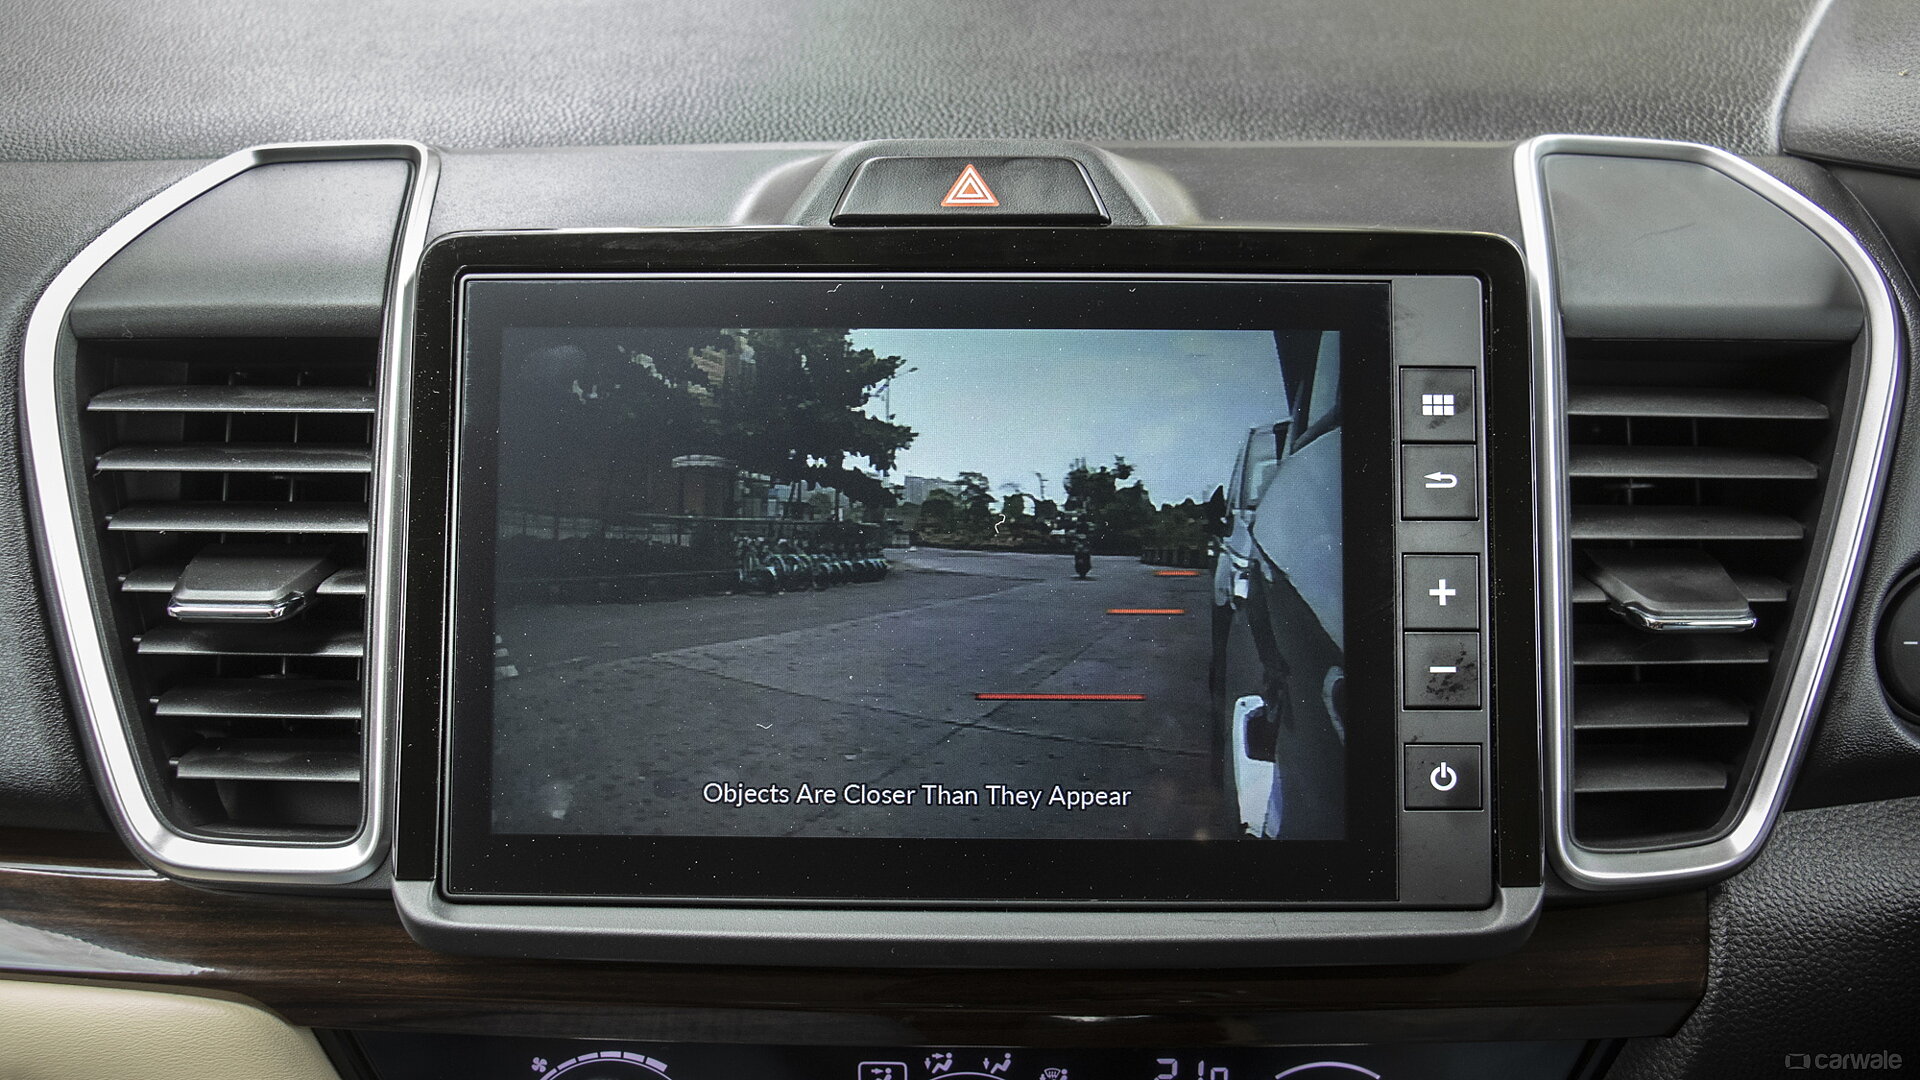 All New City Infotainment System Image, All New City ...